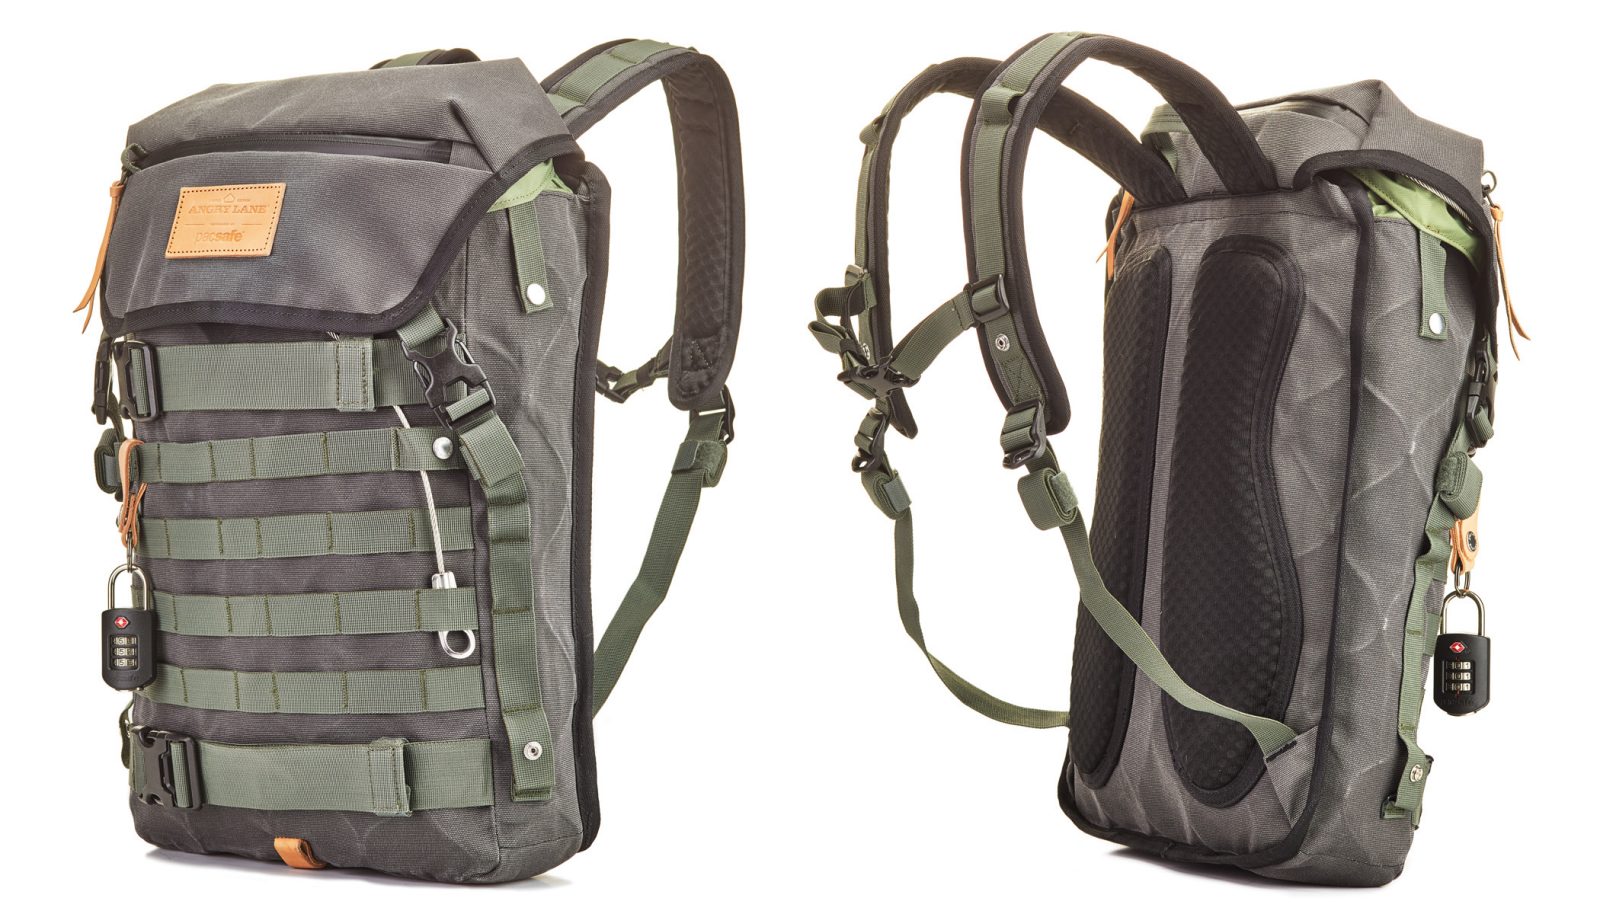 The Angry Lane Rider Daypack